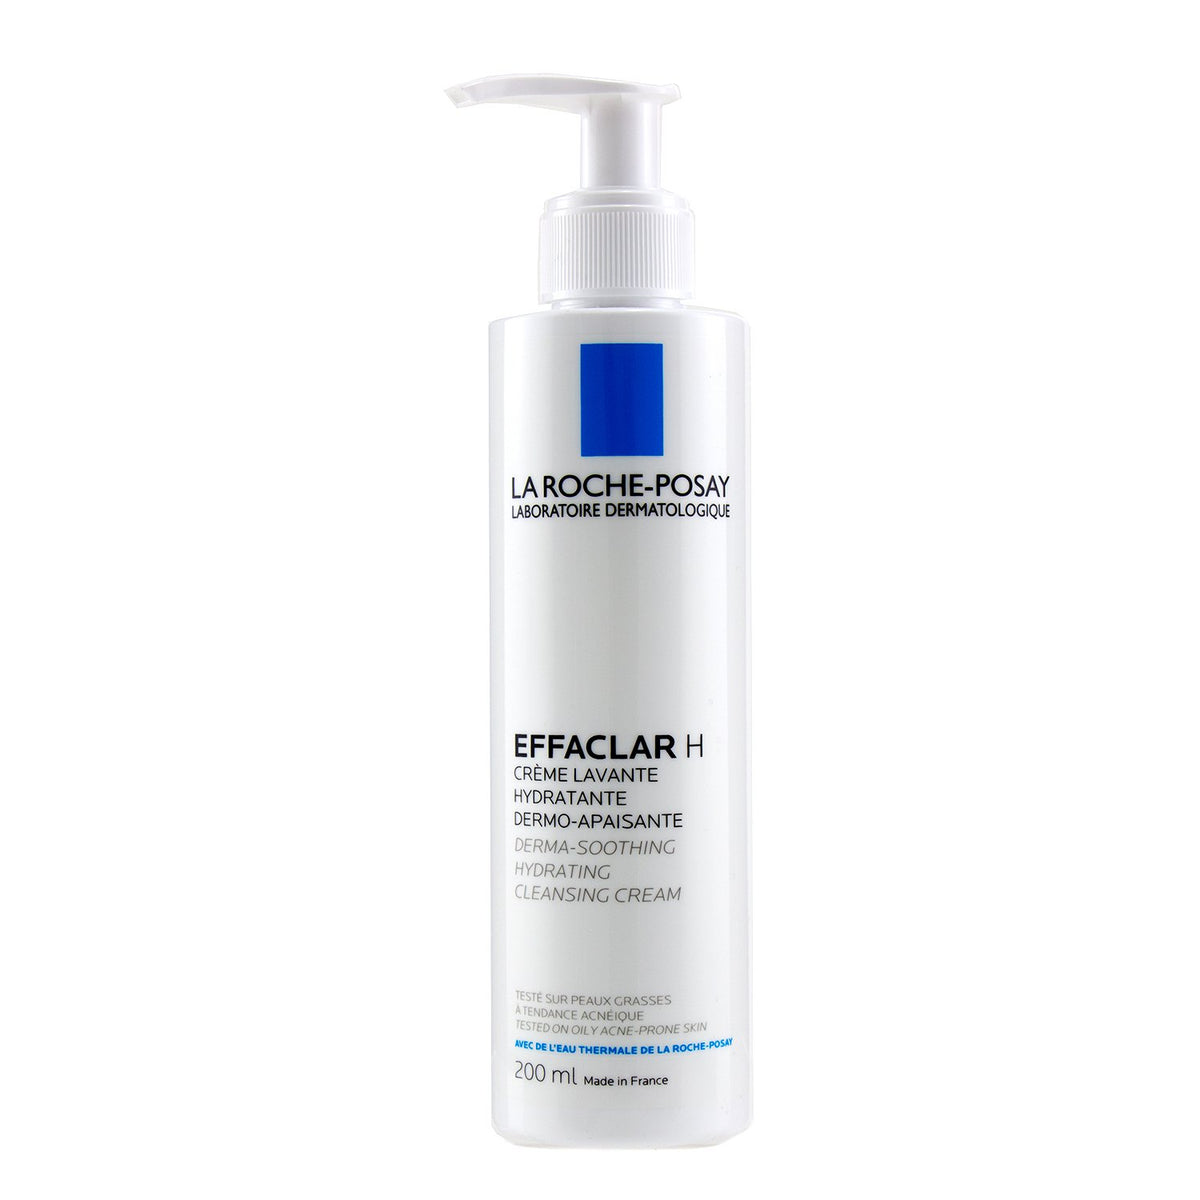 Effaclar H Derma-Soothing Hydrating Cleansing Cream for Sale | La Roche Posay, Skincare, Buy – Author